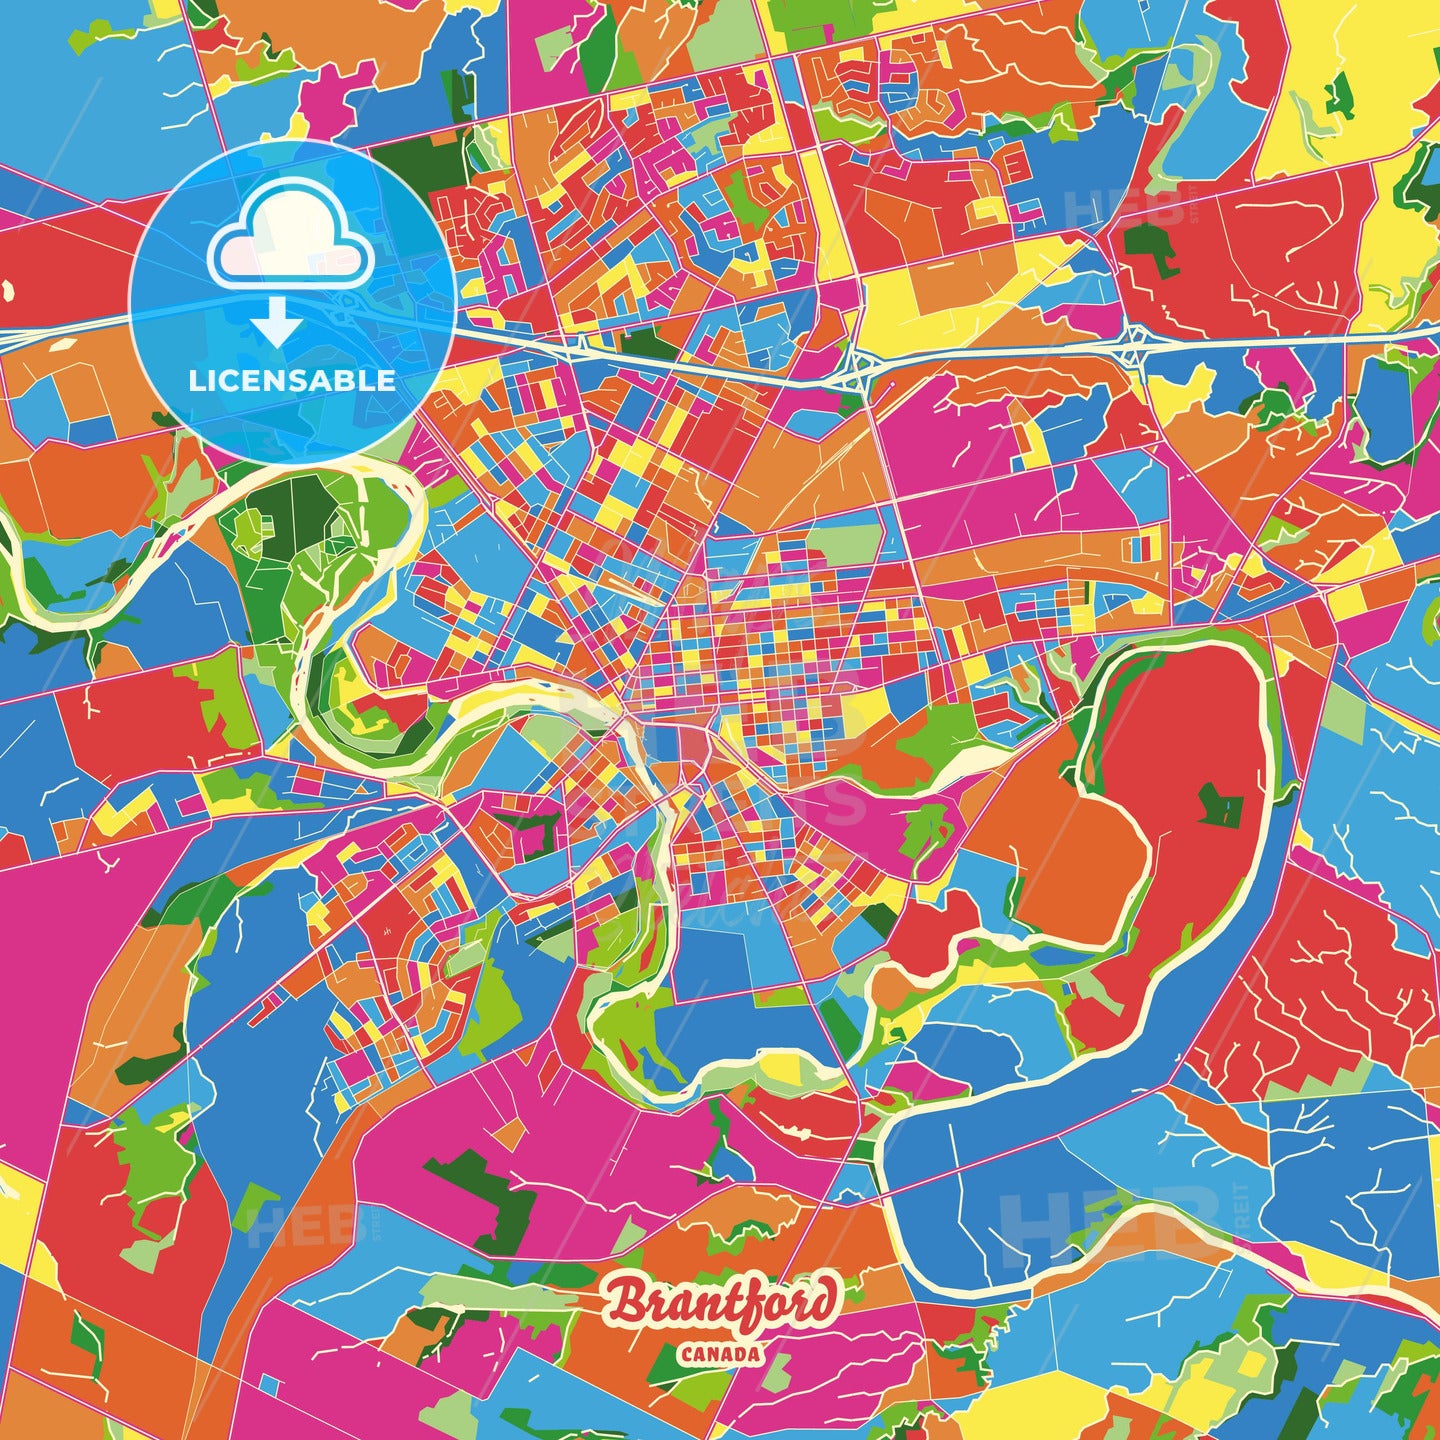 Brantford, Canada Crazy Colorful Street Map Poster Template - HEBSTREITS Sketches